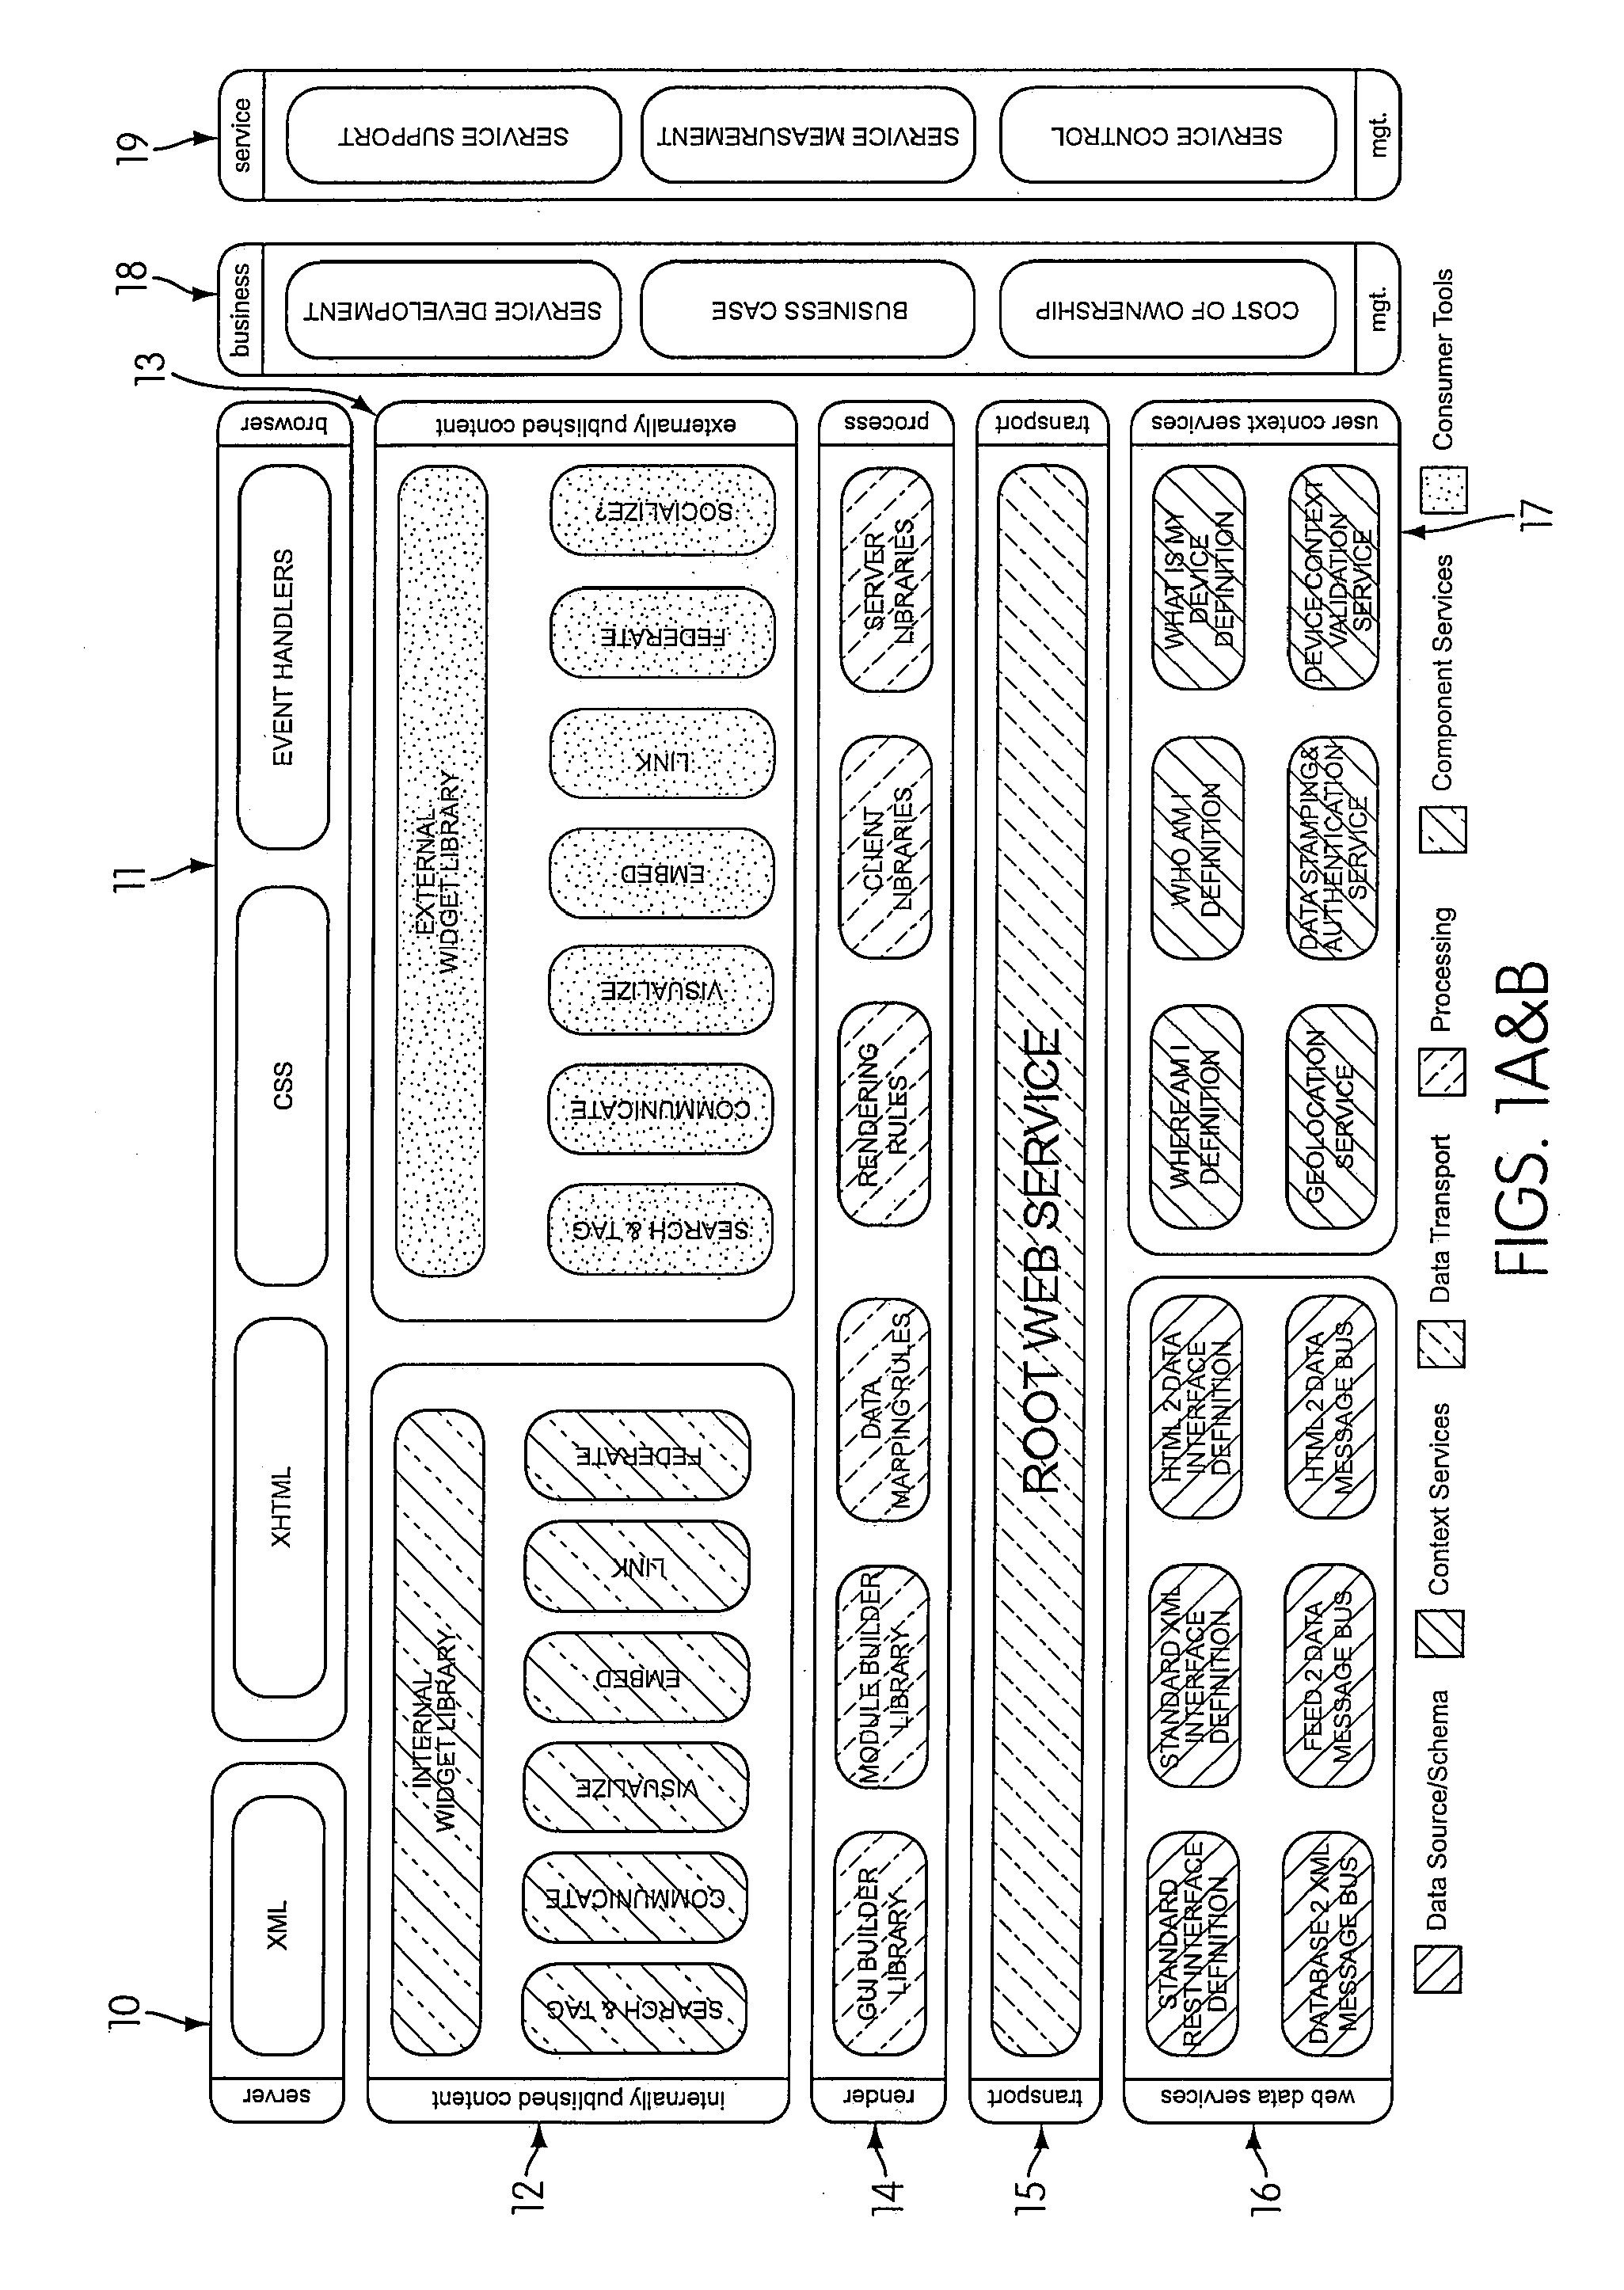 Enterprise architecture system and method